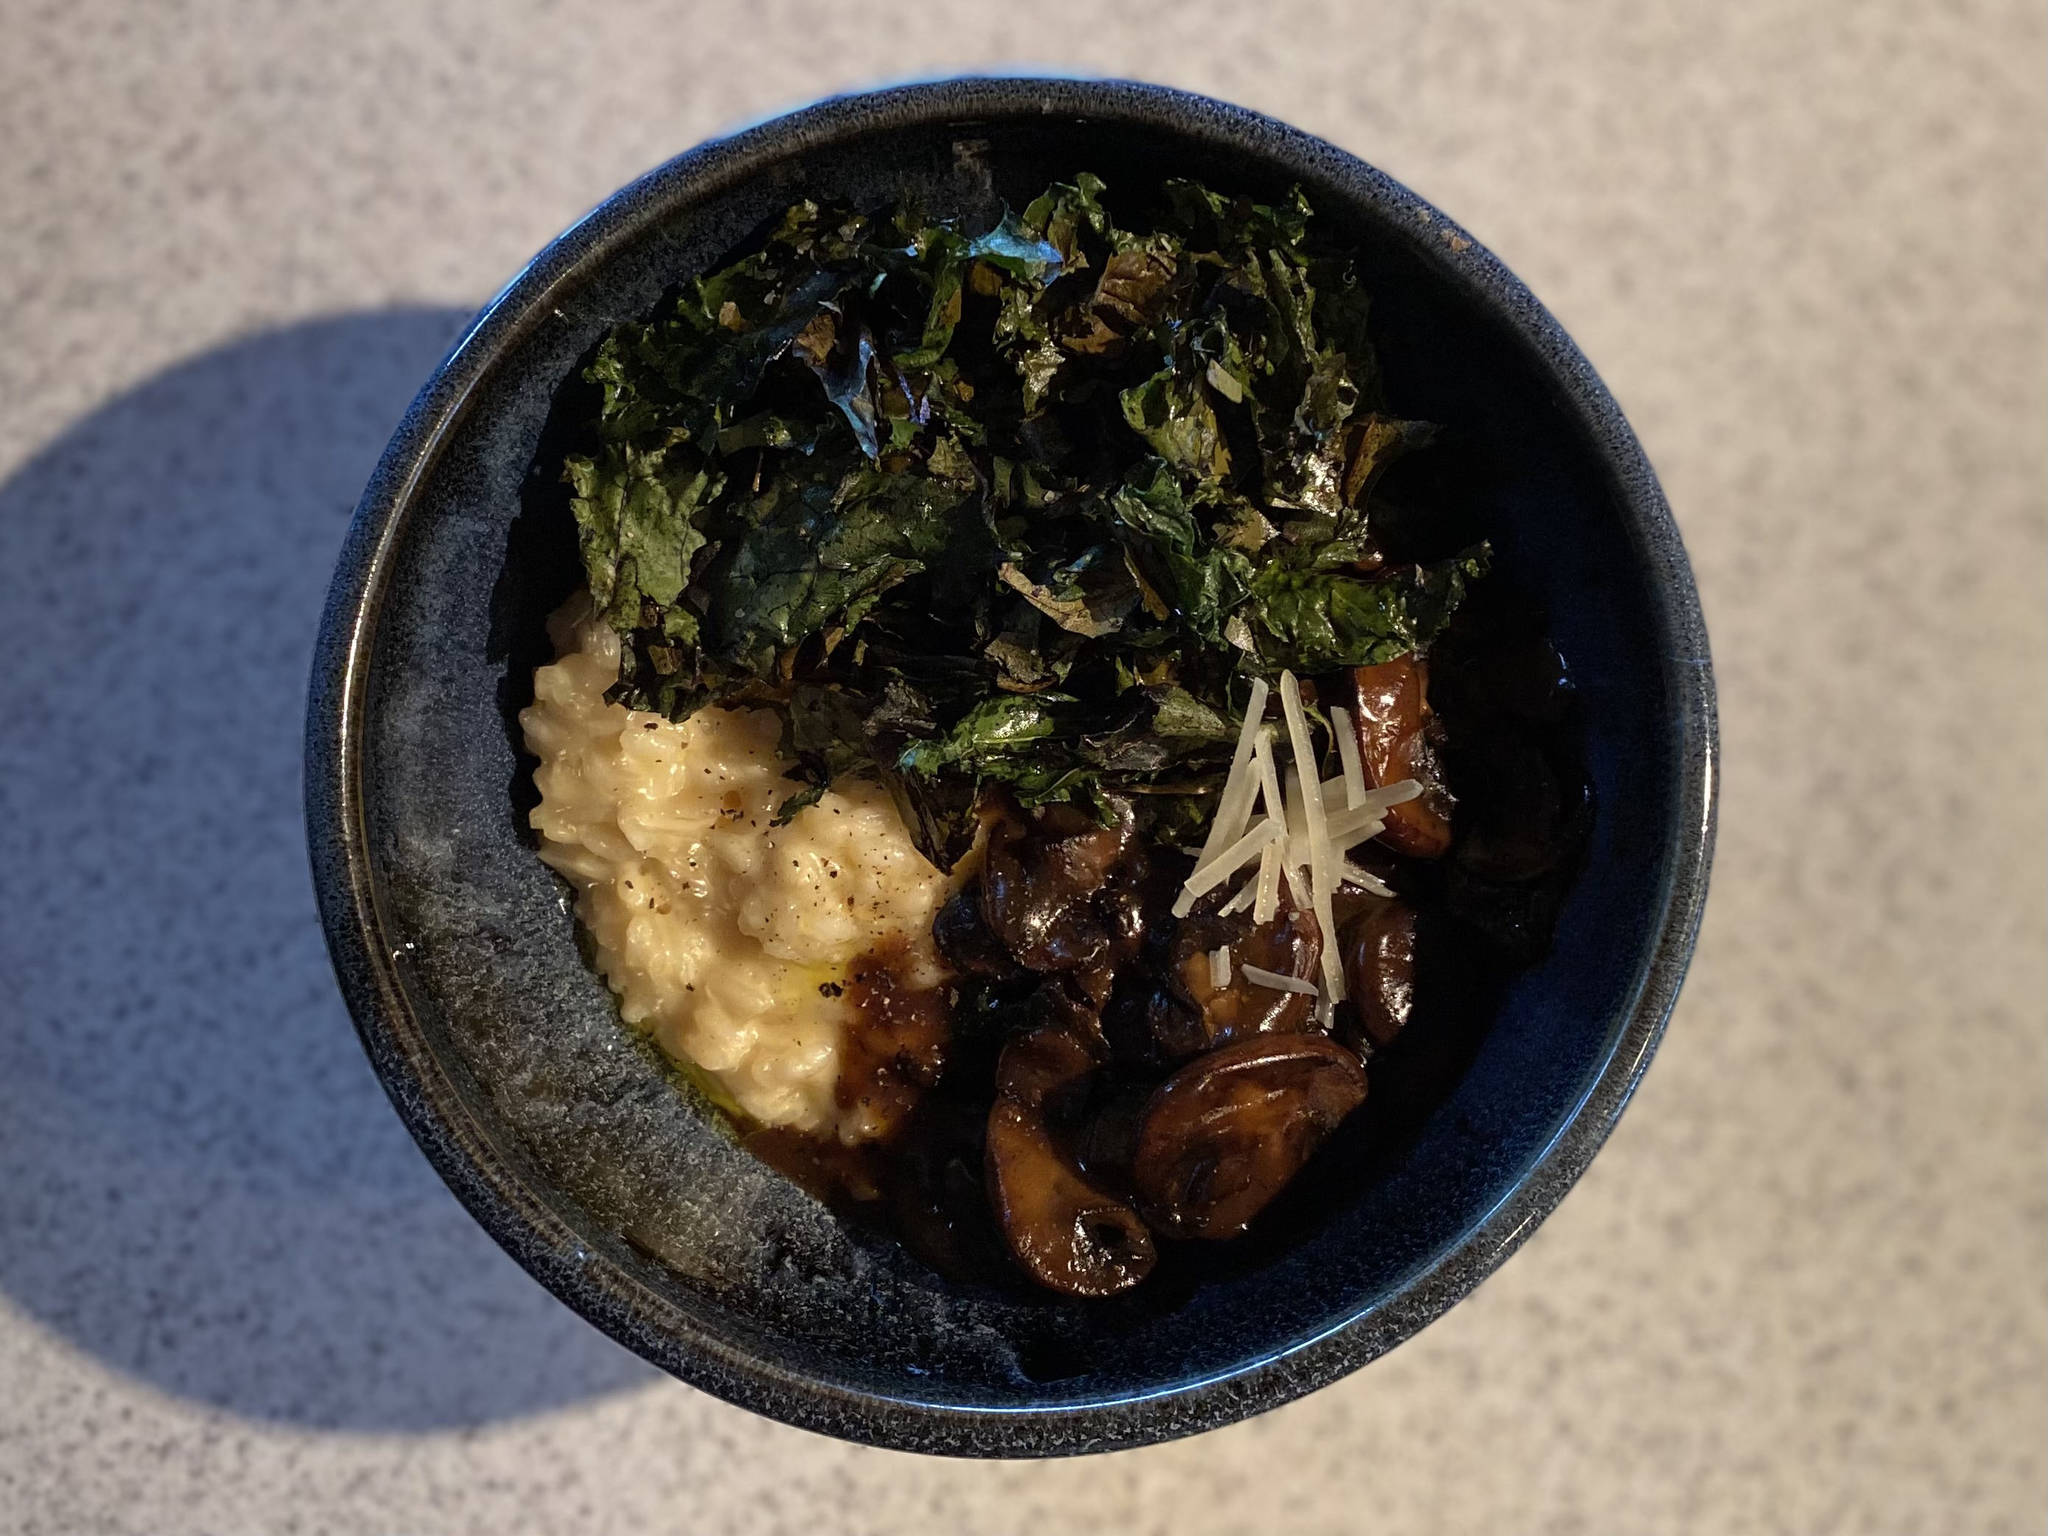 This rich Parmesan risotto makes a creamy base for mushrooms and kale. Photographed July 10, 2021, in Nikiski, Alaska. (Photo by Tressa Dale/Peninsula Clarion)